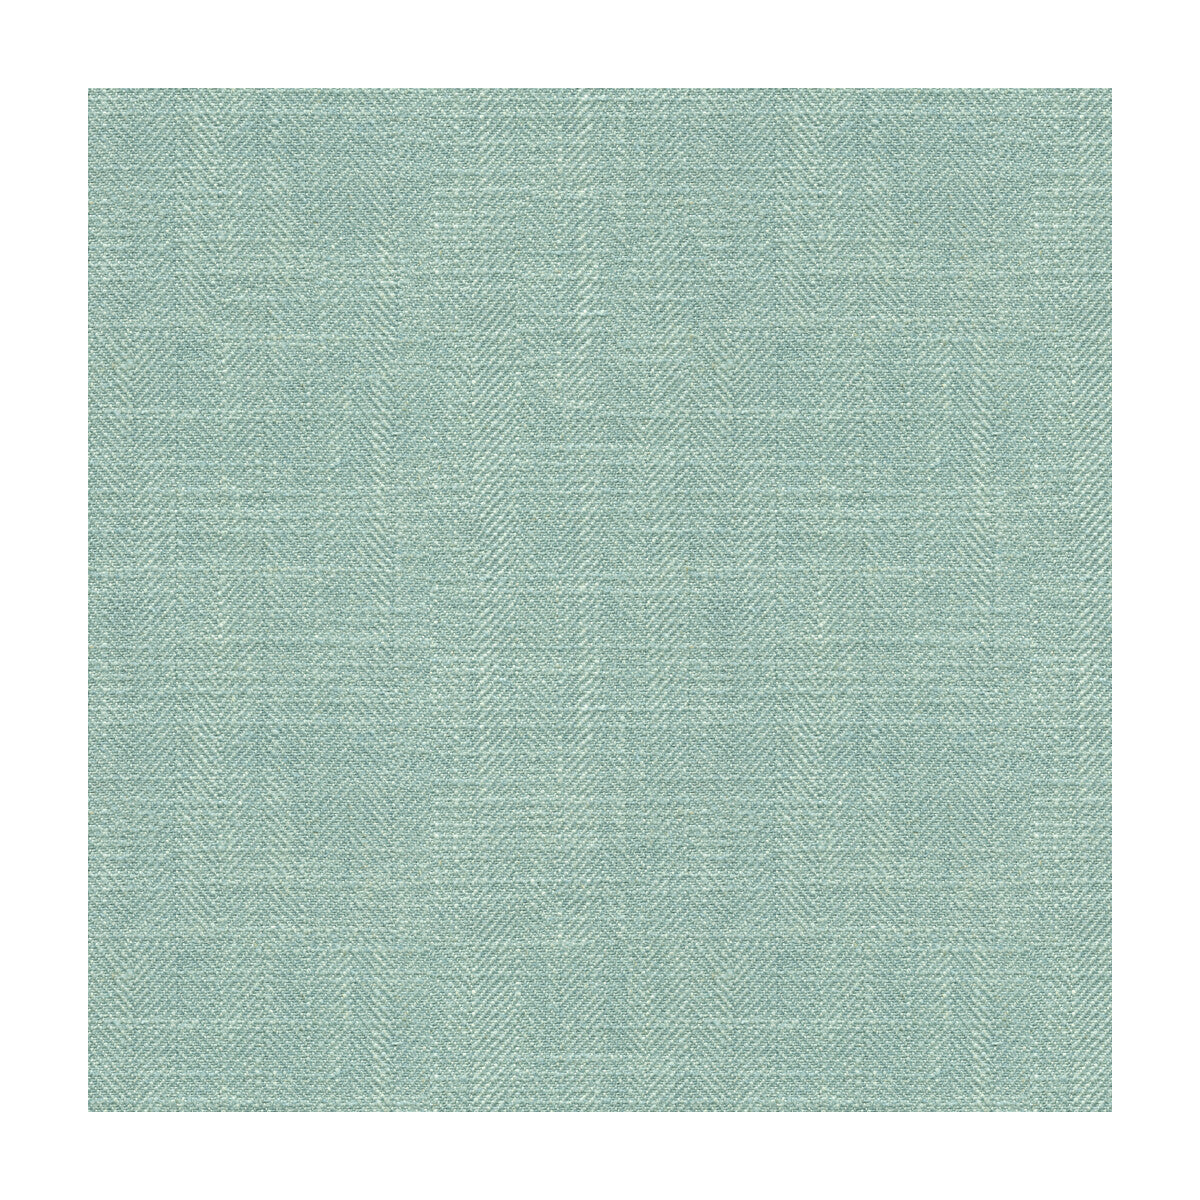 Kravet Basics fabric in 33842-15 color - pattern 33842.15.0 - by Kravet Basics in the Perfect Plains collection